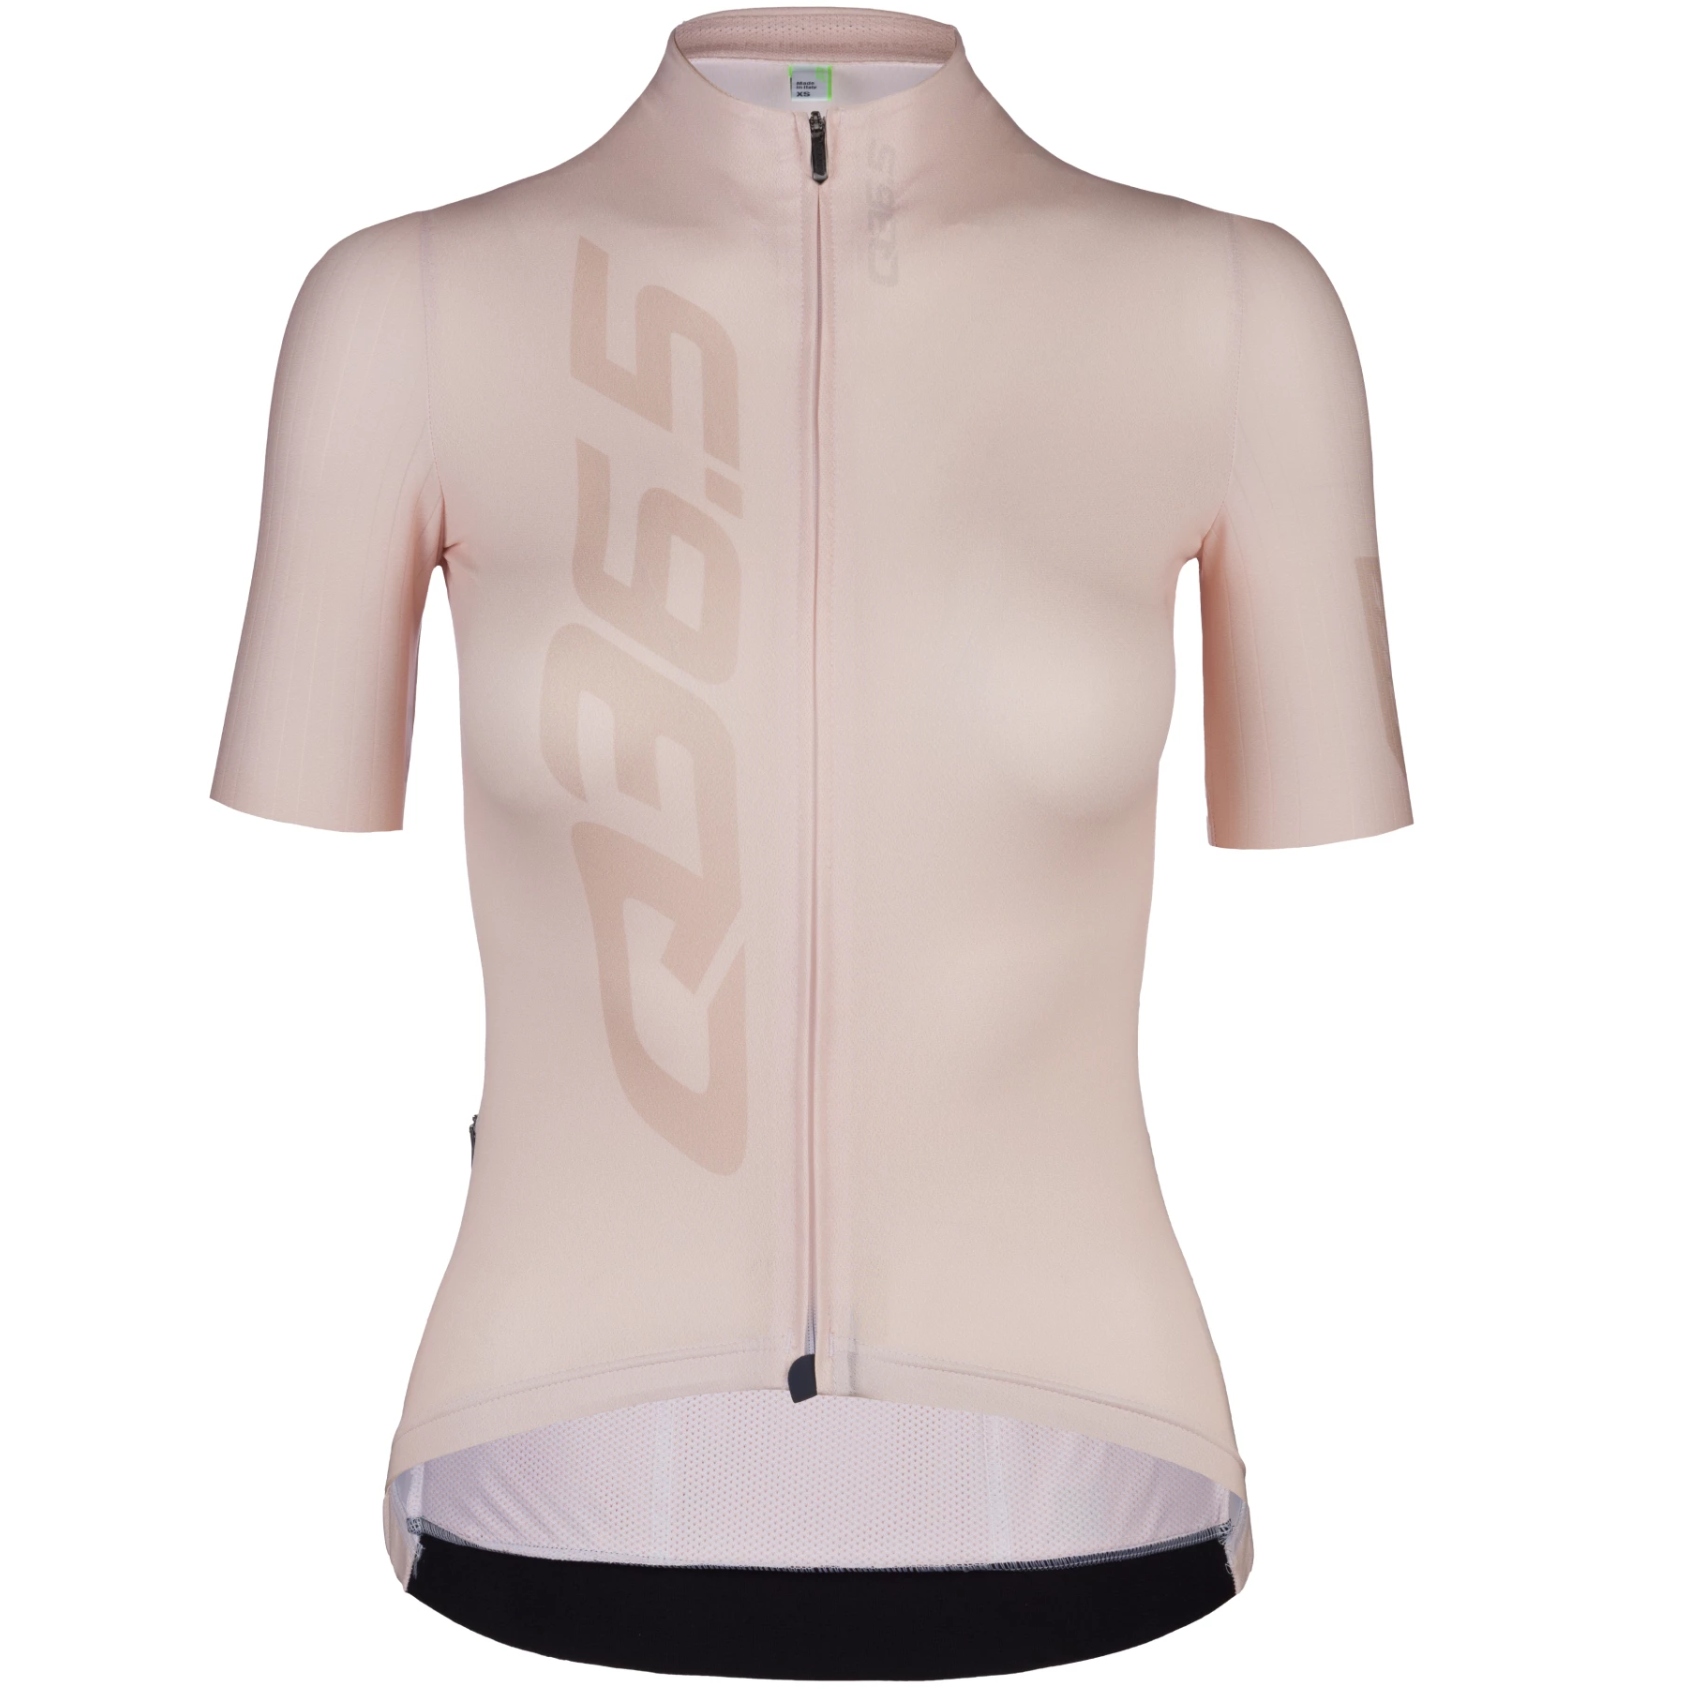 Picture of Q36.5 G1 Signature Short Sleeve Jersey Women - ivory white